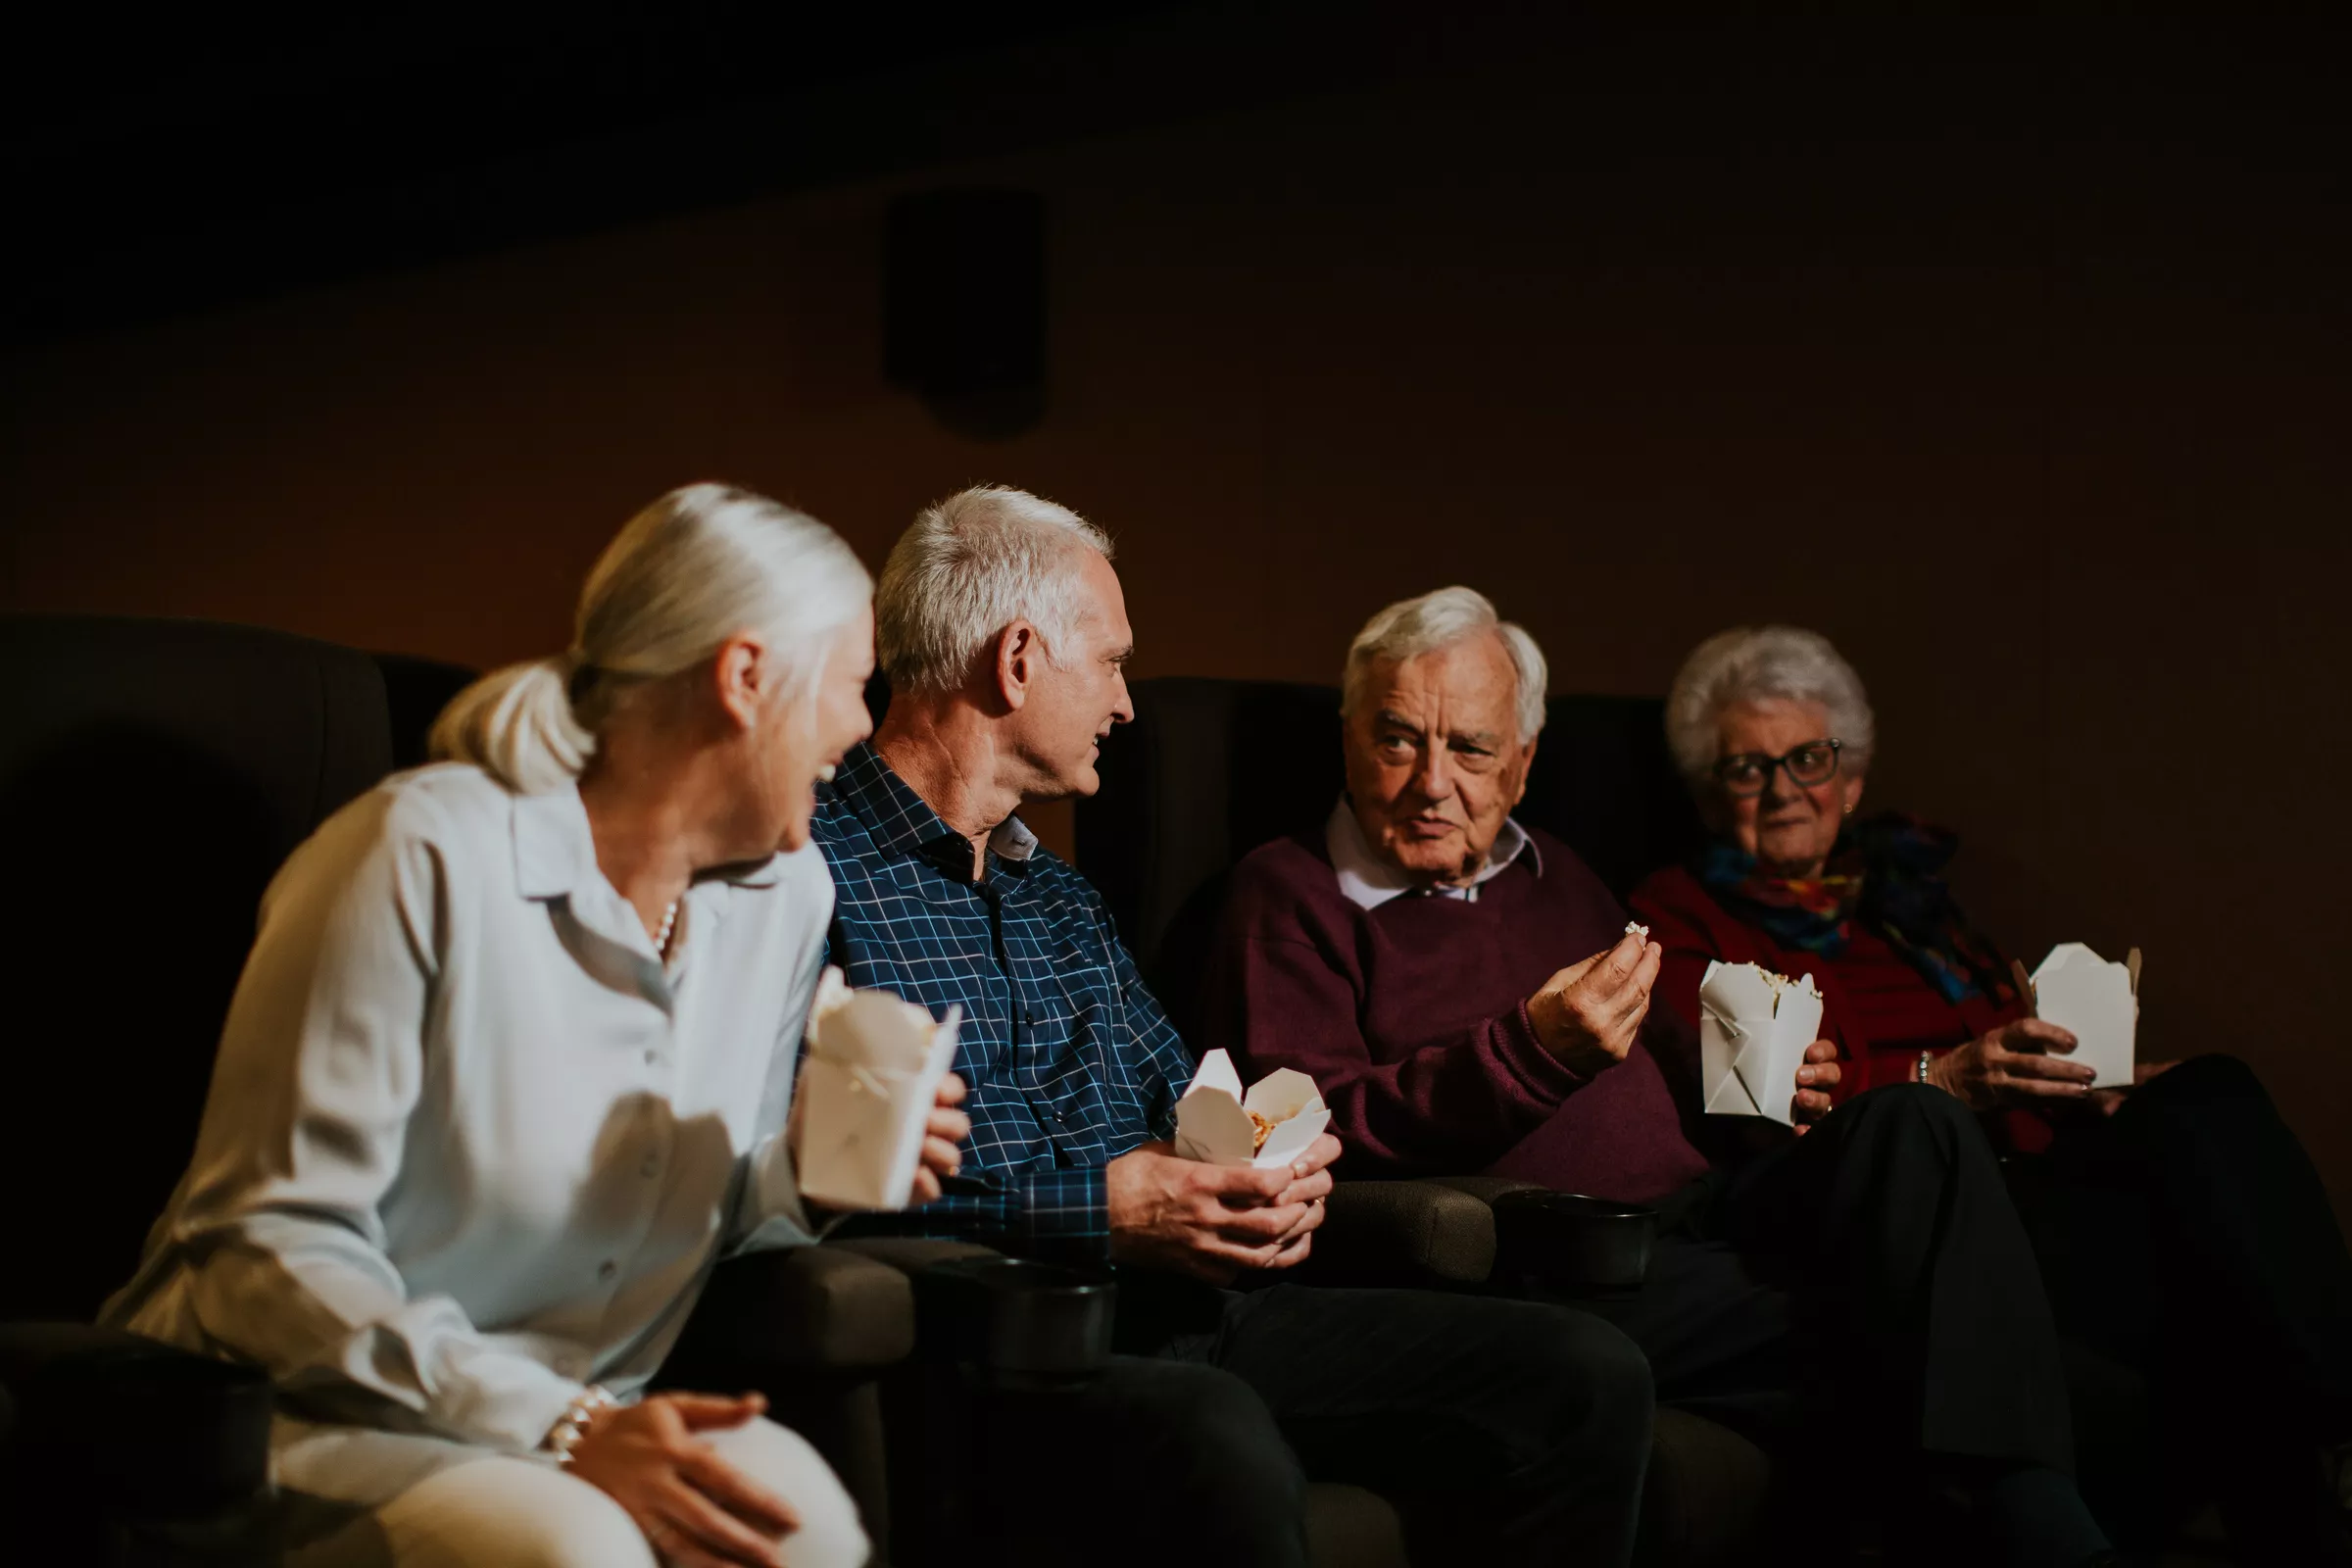 Four senior people eating popcorn and chatting at the movies